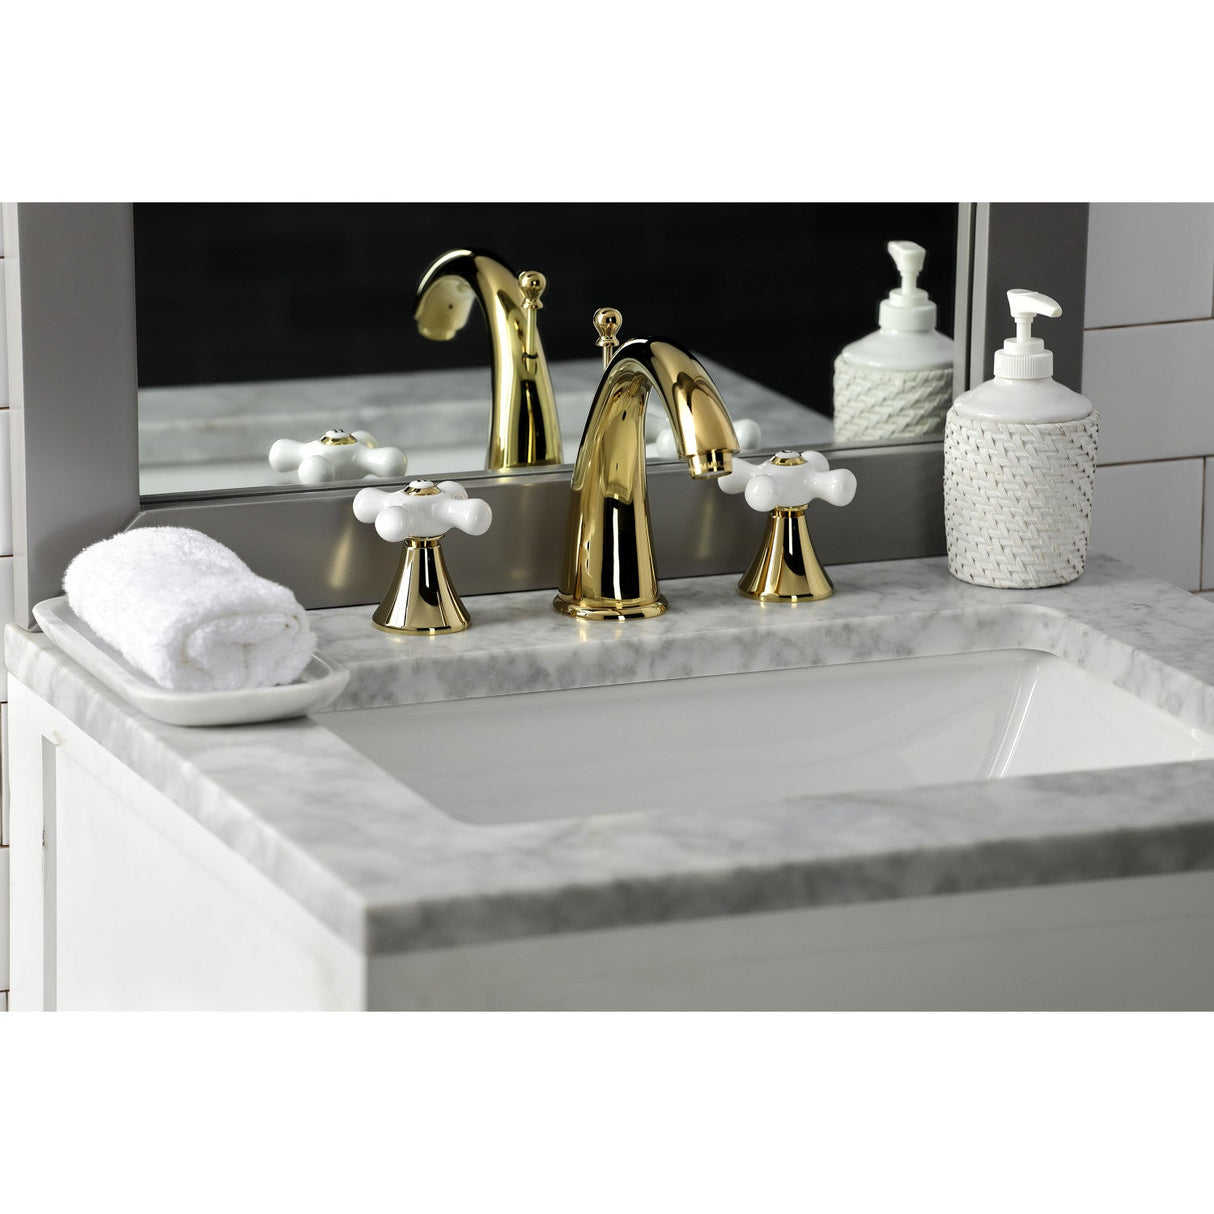 Naples KS2972PX Two-Handle 3-Hole Deck Mount Widespread Bathroom Faucet with Brass Pop-Up, Polished Brass